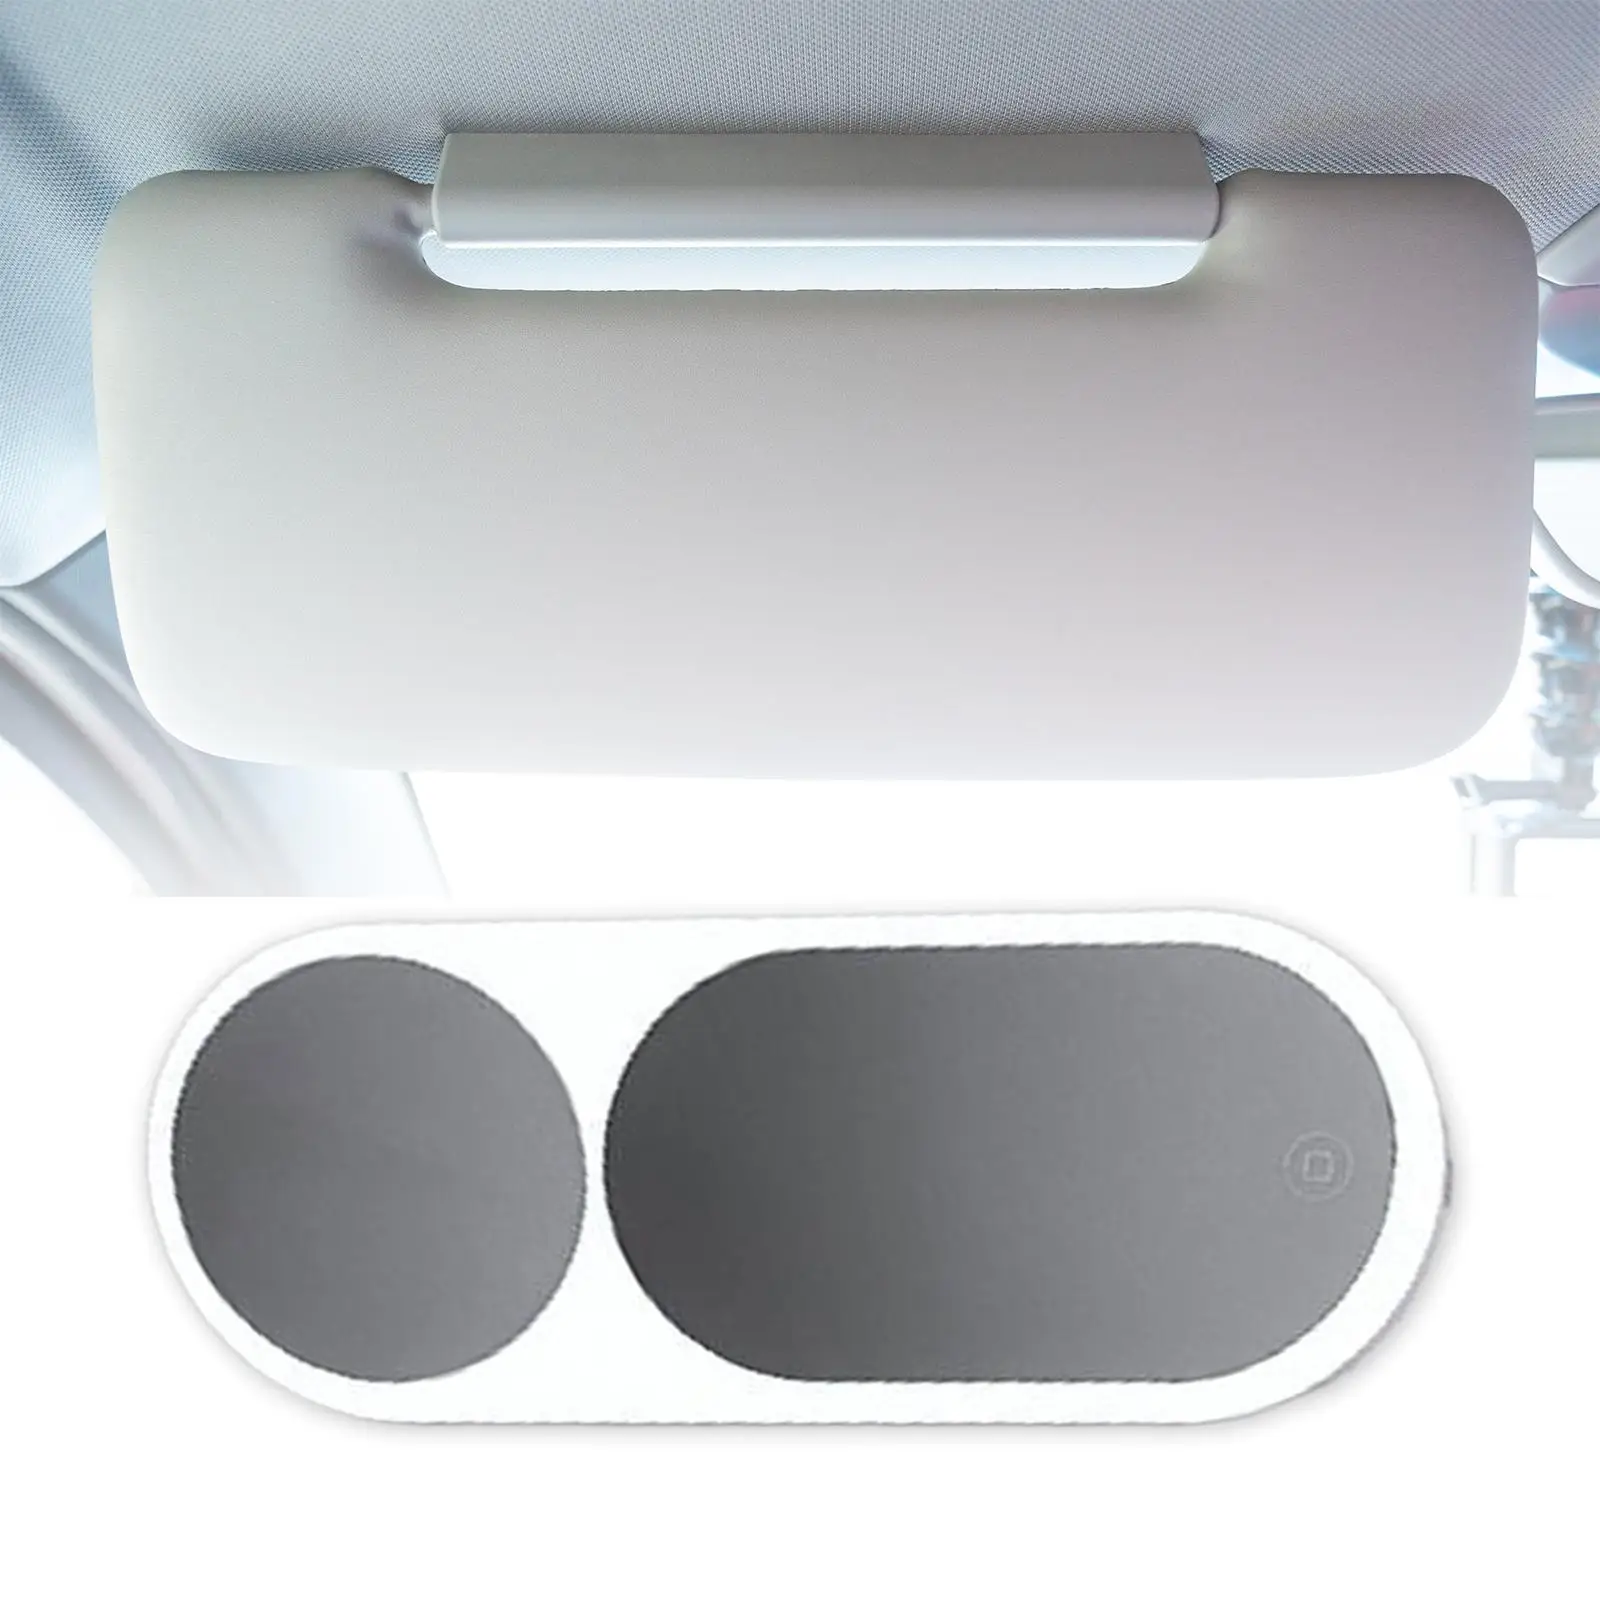 Car Sun Visor Makeup Mirror Replacement Part High Quality Easy to Install Auto Vanity Mirror for Automobile Truck SUV Car